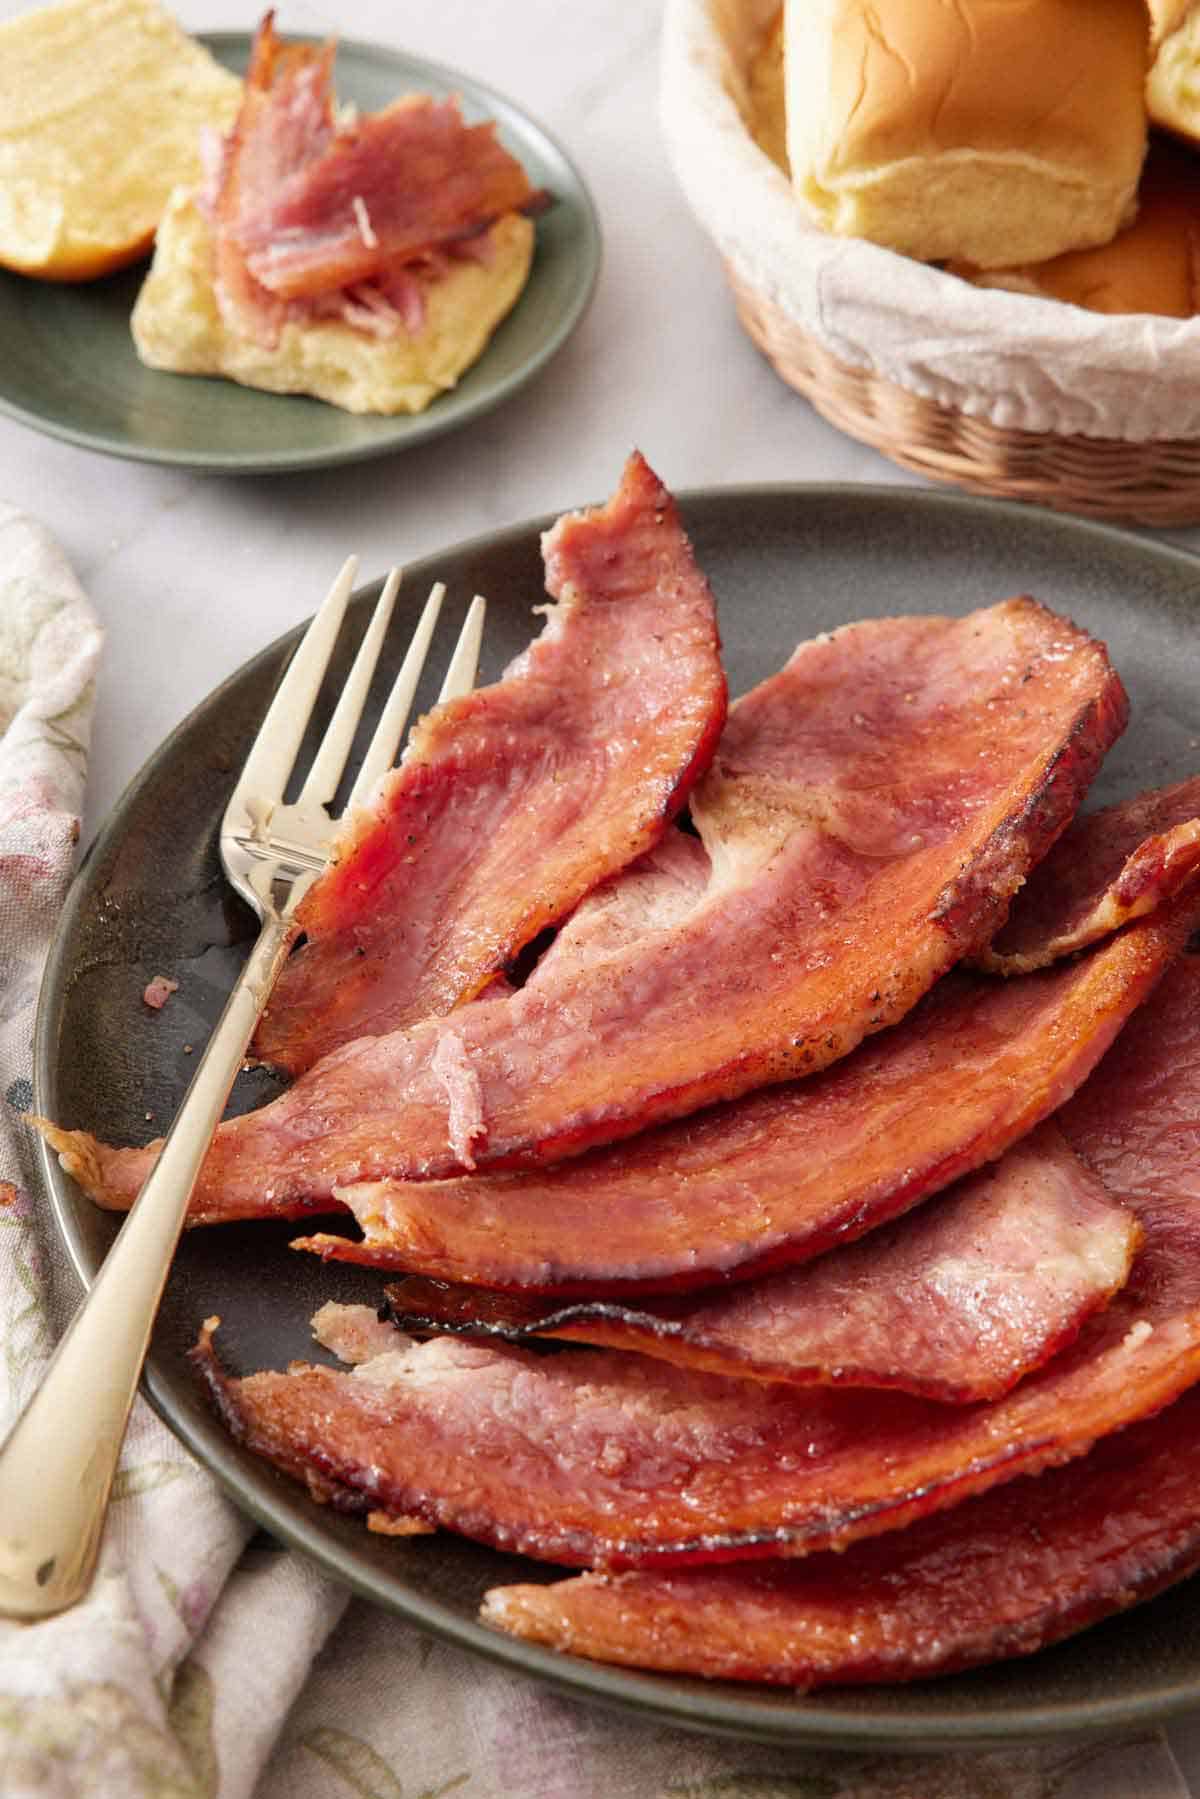 A plate with a pieces of honey baked ham with a fork. A plate with bread and ham on it in the background.